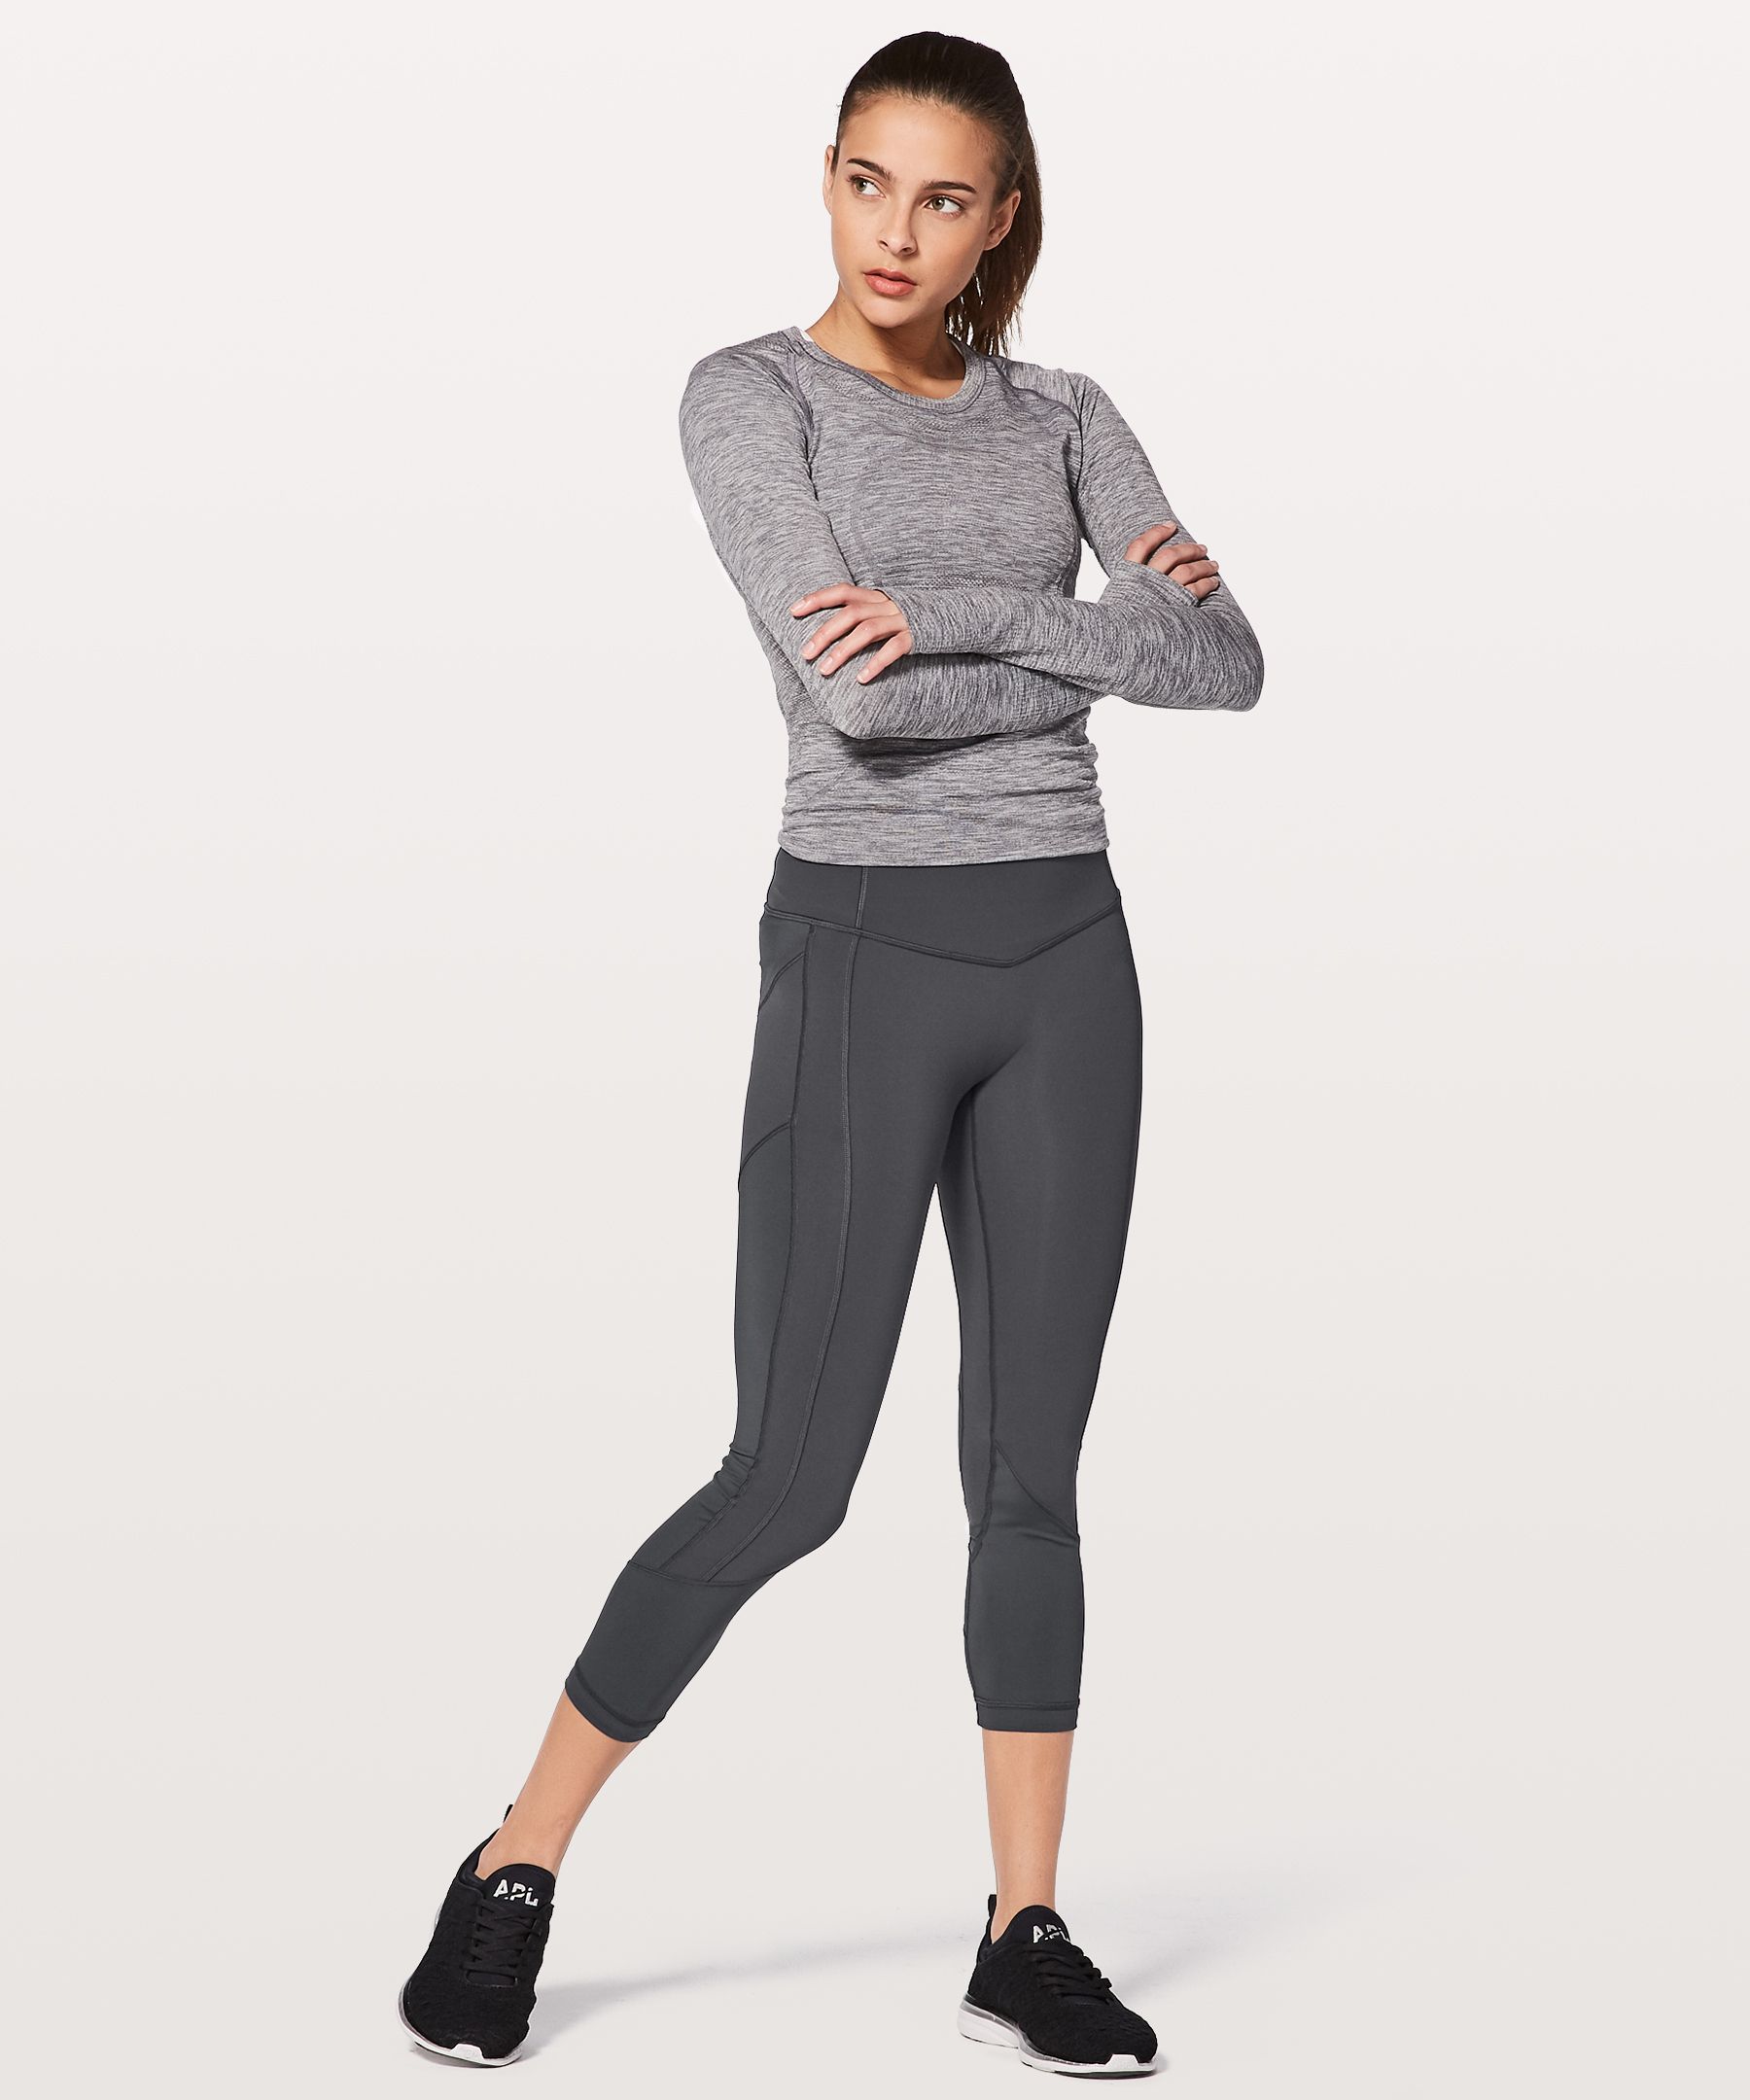 Lululemon All The Right Places Crop II *23 - Athletic apparel